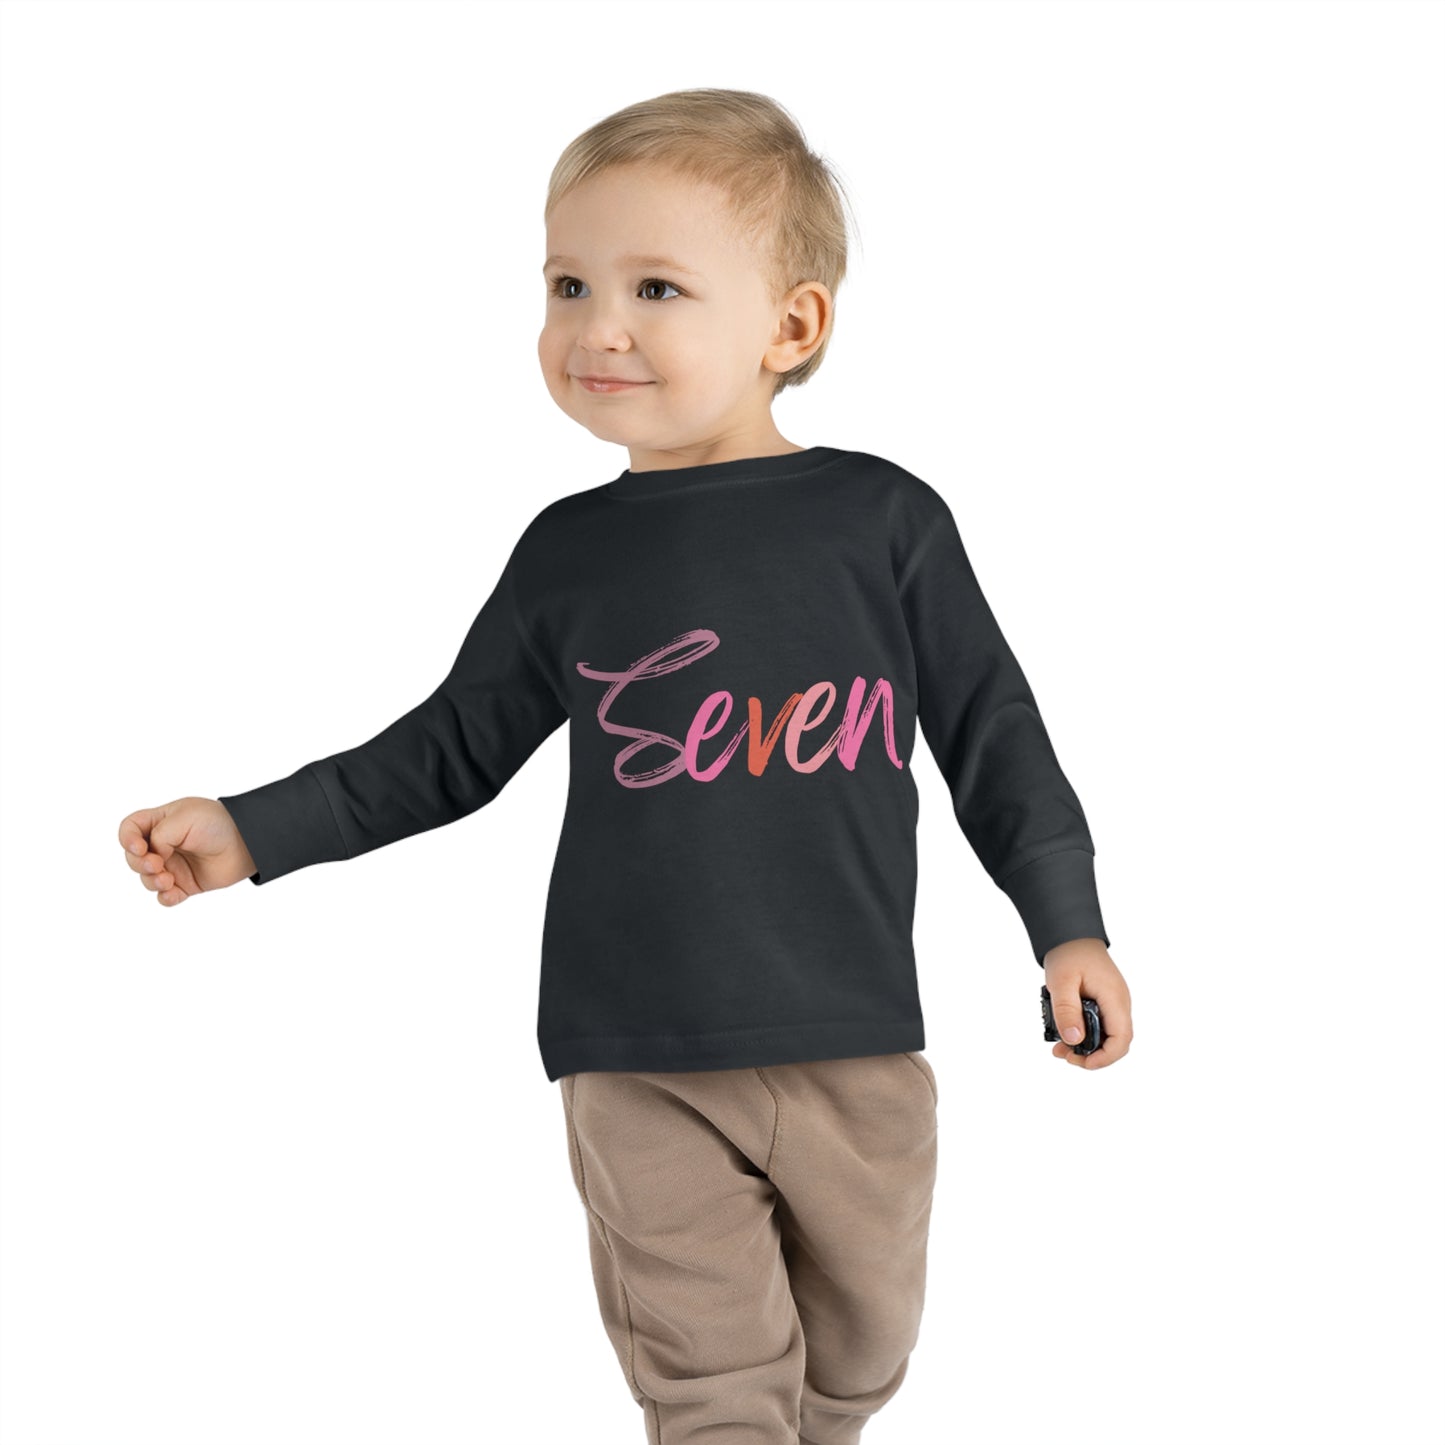 Long Sleeve Age Tee Shirt For 7-year-old Unisex Kids